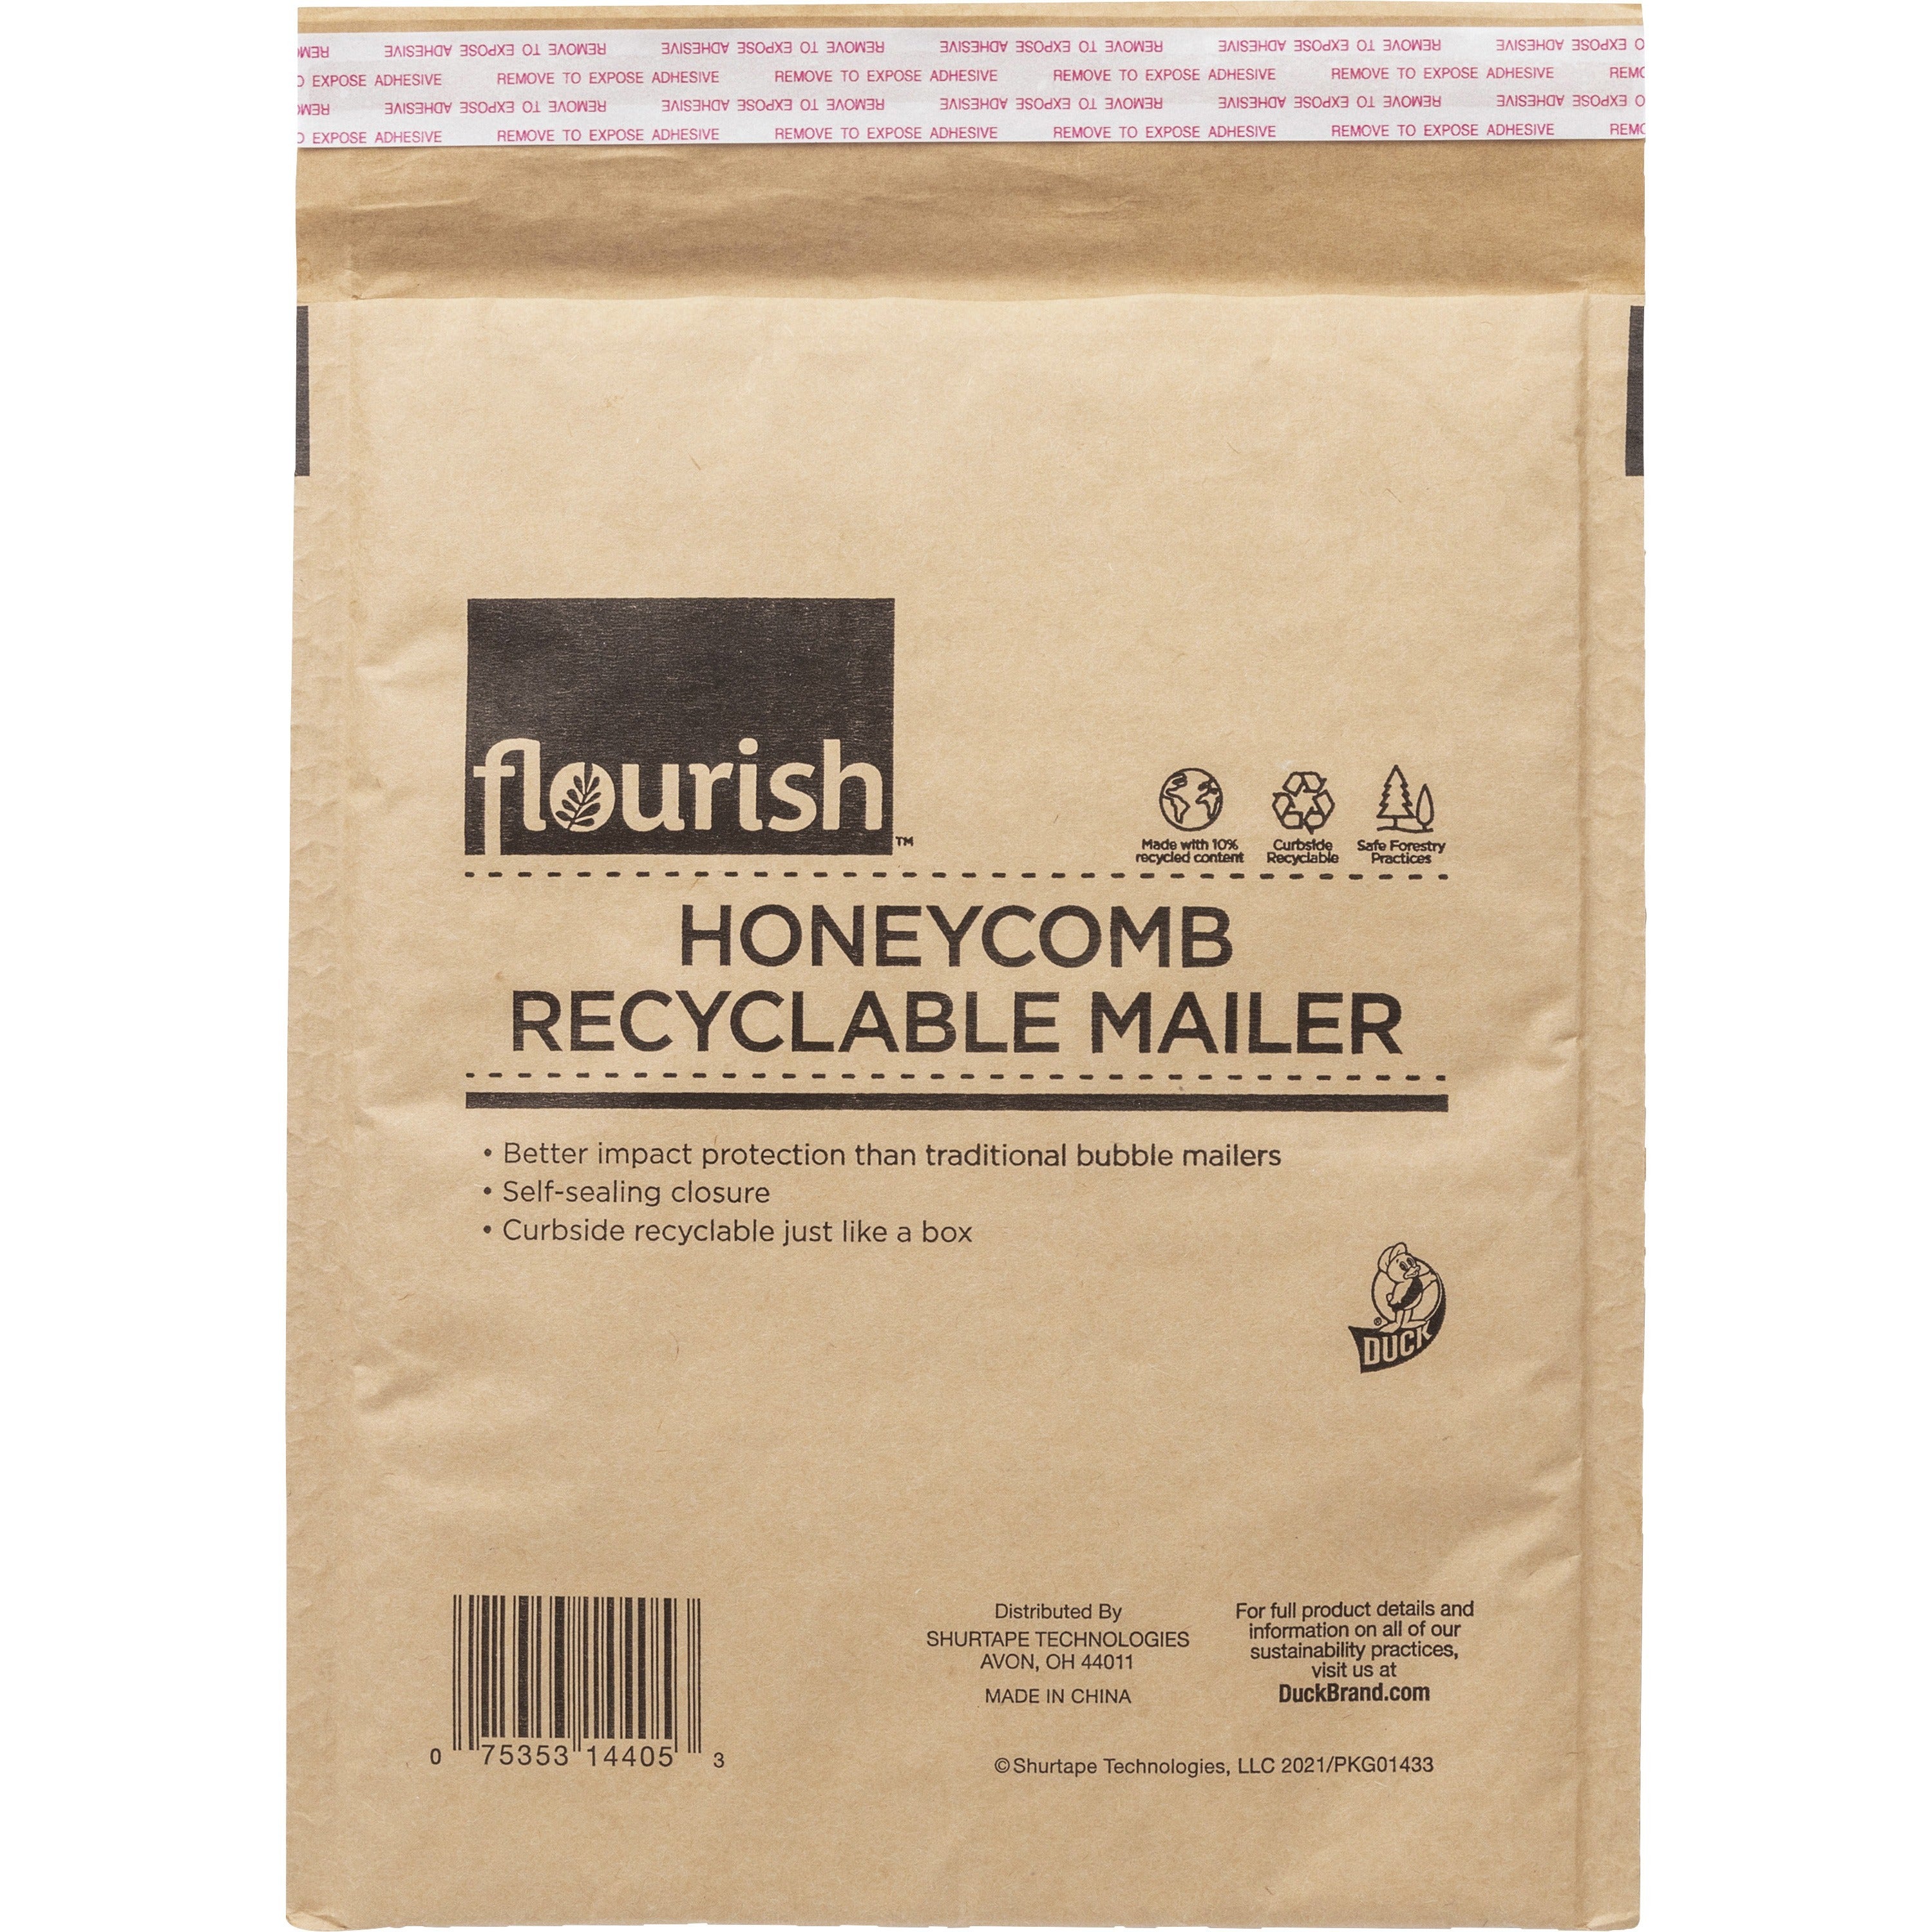 duck-brand-flourish-honeycomb-recyclable-mailers-mailing-shipping-8-4-5-width-x-10-45-64-length-seal-1-each-brown_duc287432 - 1